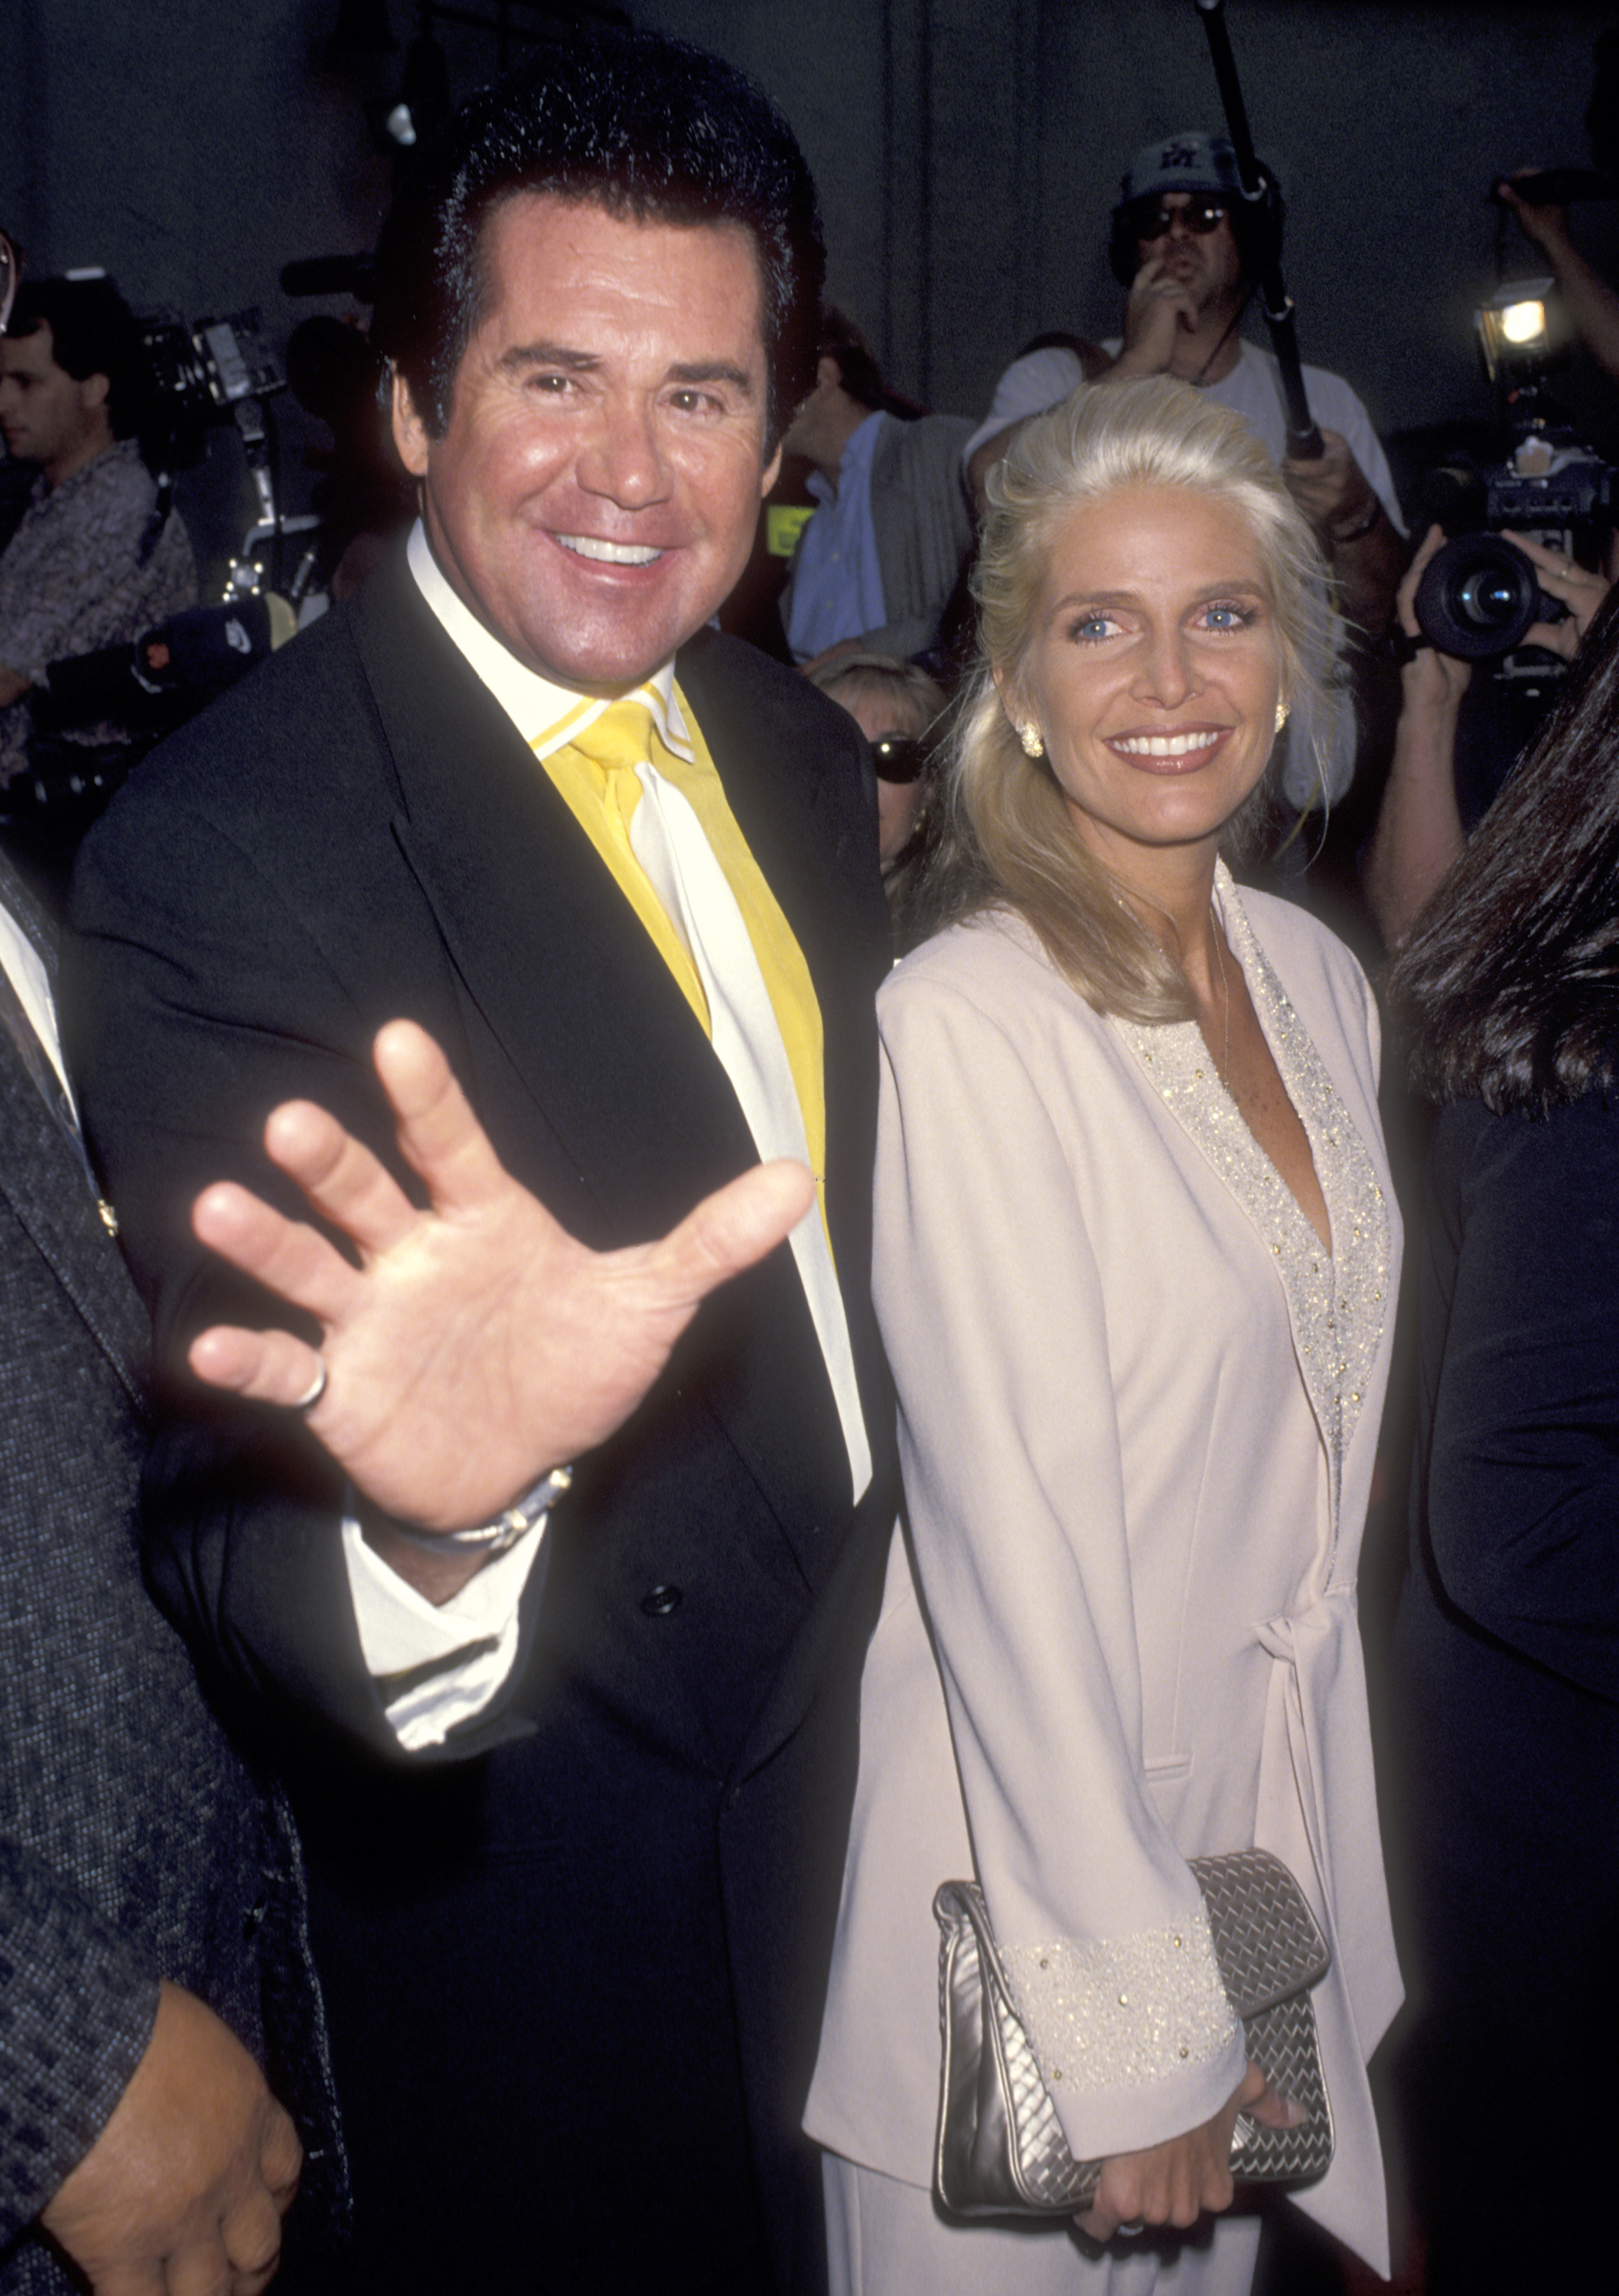 Wayne Newton and wife Kathleen McCrone at the premiere of "Beverly Hills Cop III" on May 22, 1994 in Hollywood, California | Source: Getty Images